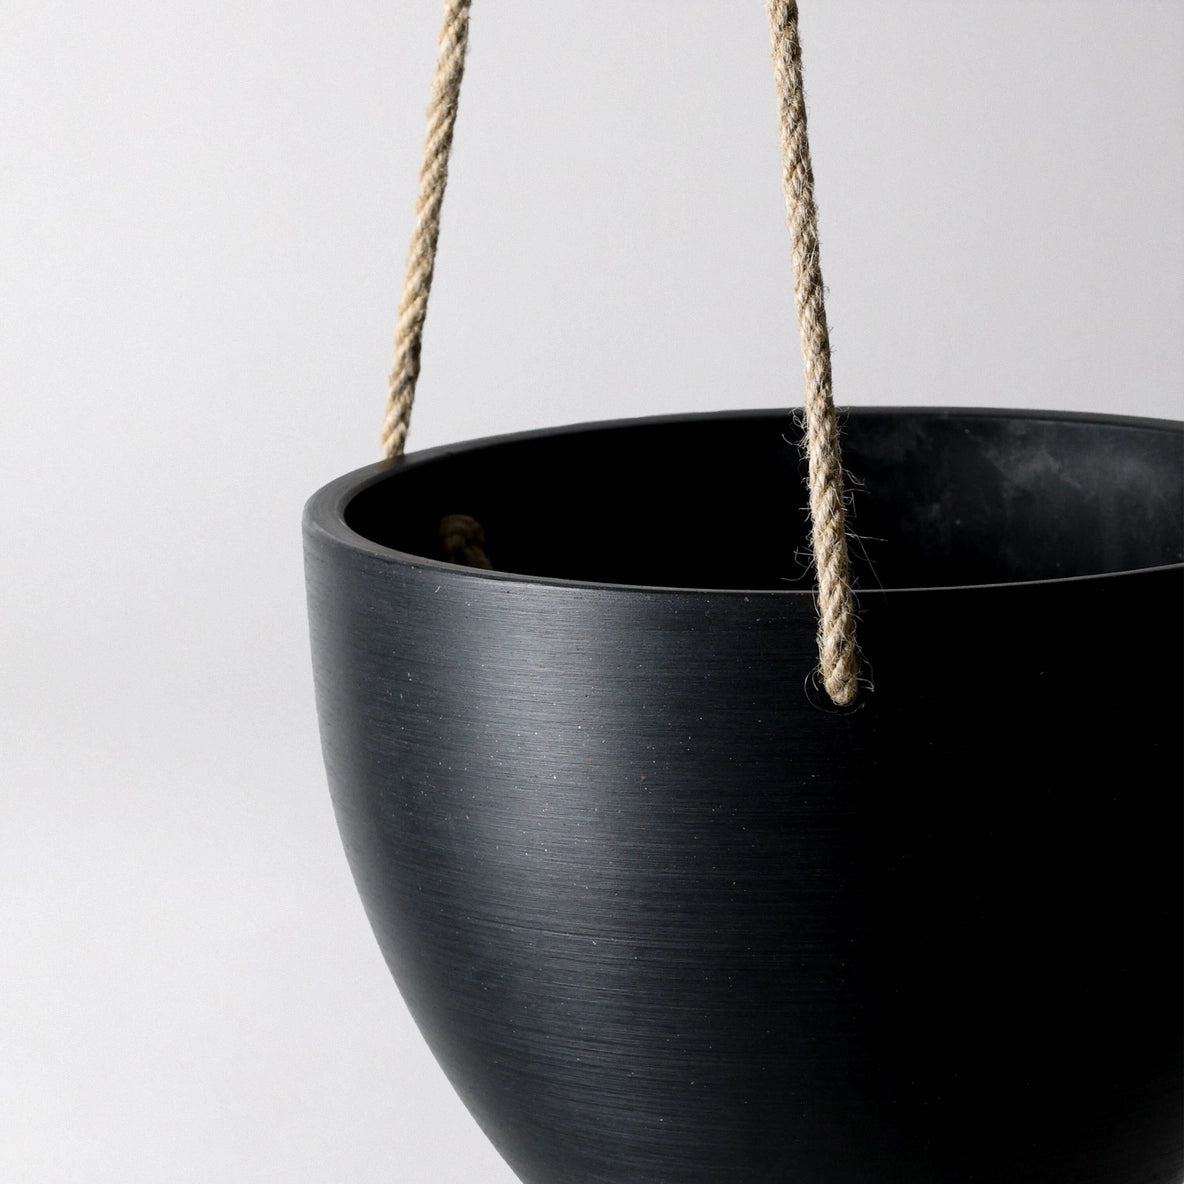 Signature Stone Hanging Planter Pot - Available in 8" or 12"